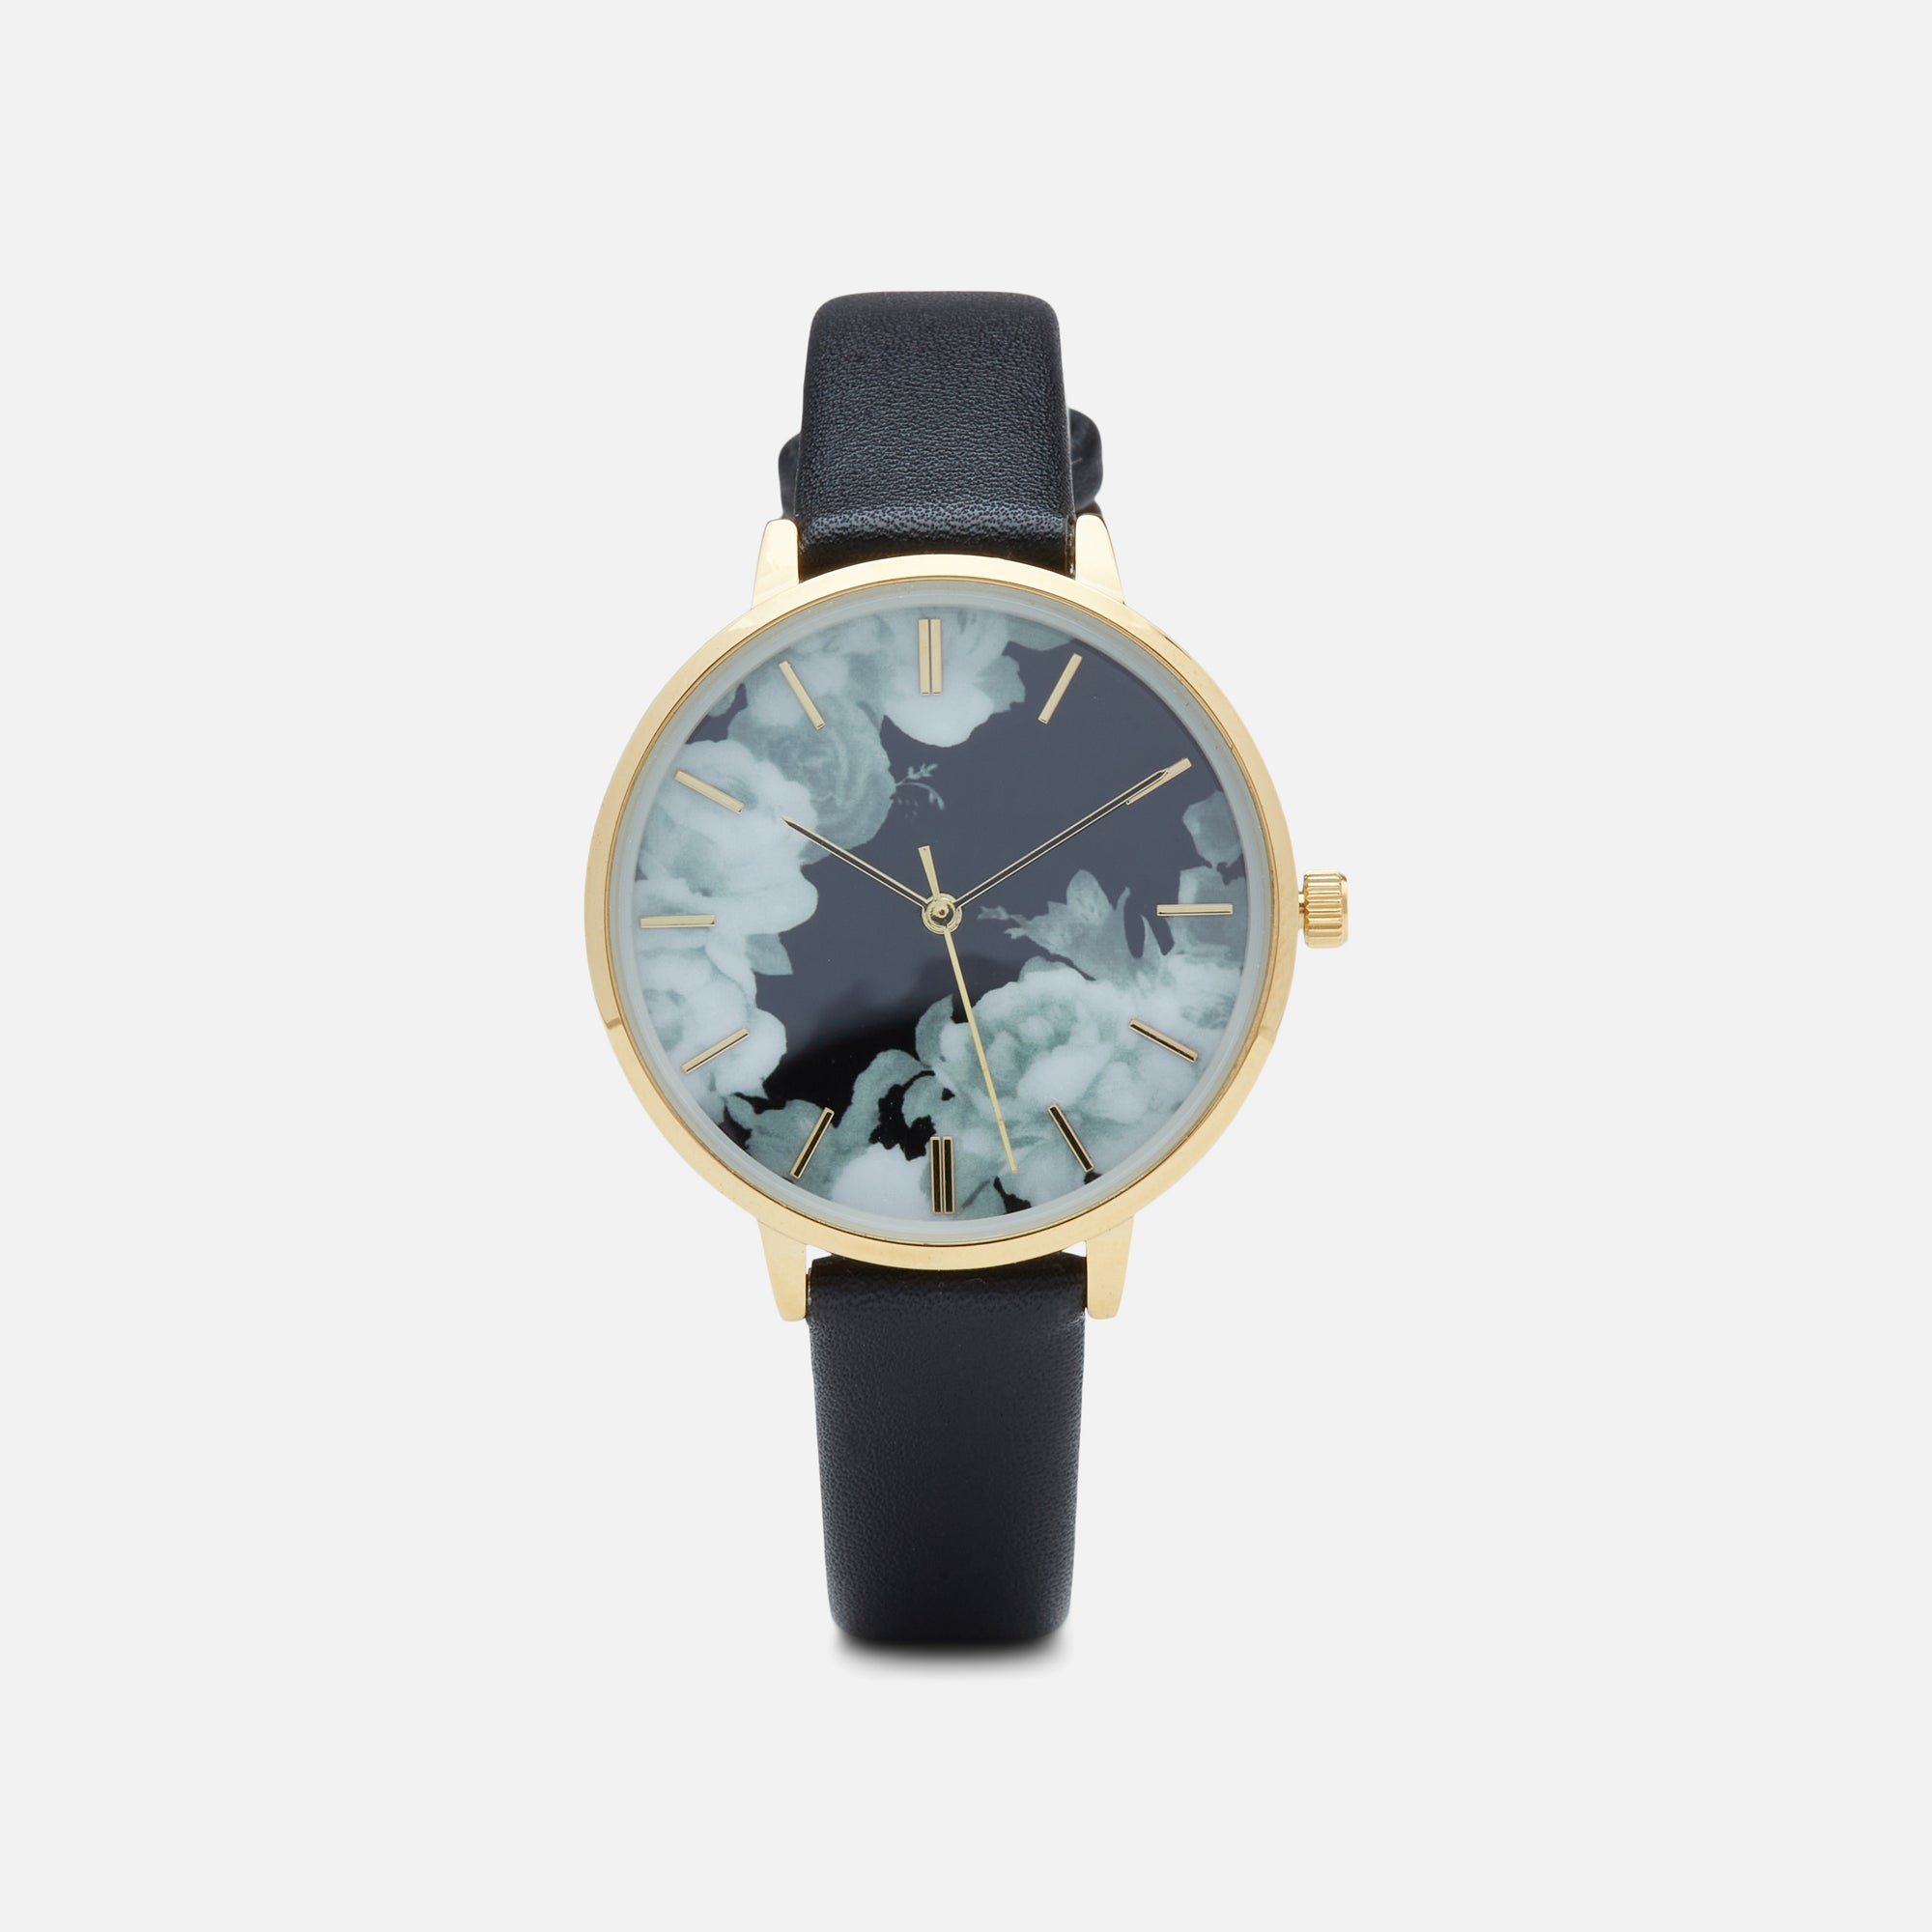 Classik collection - black watch with floral dial